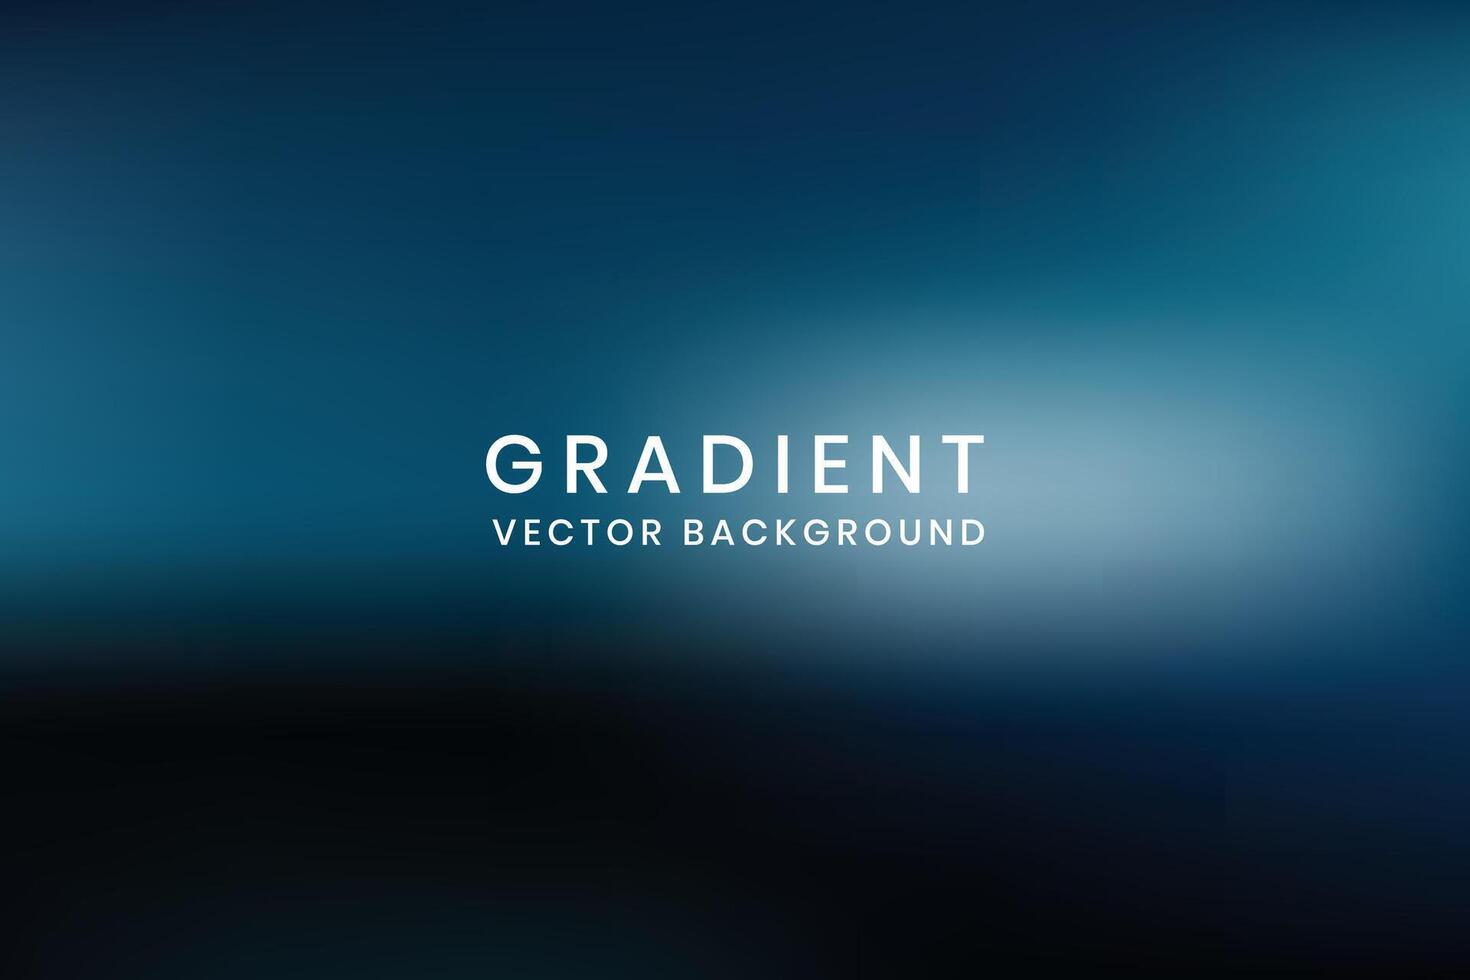 Abstract gradient vector background vibrant colors